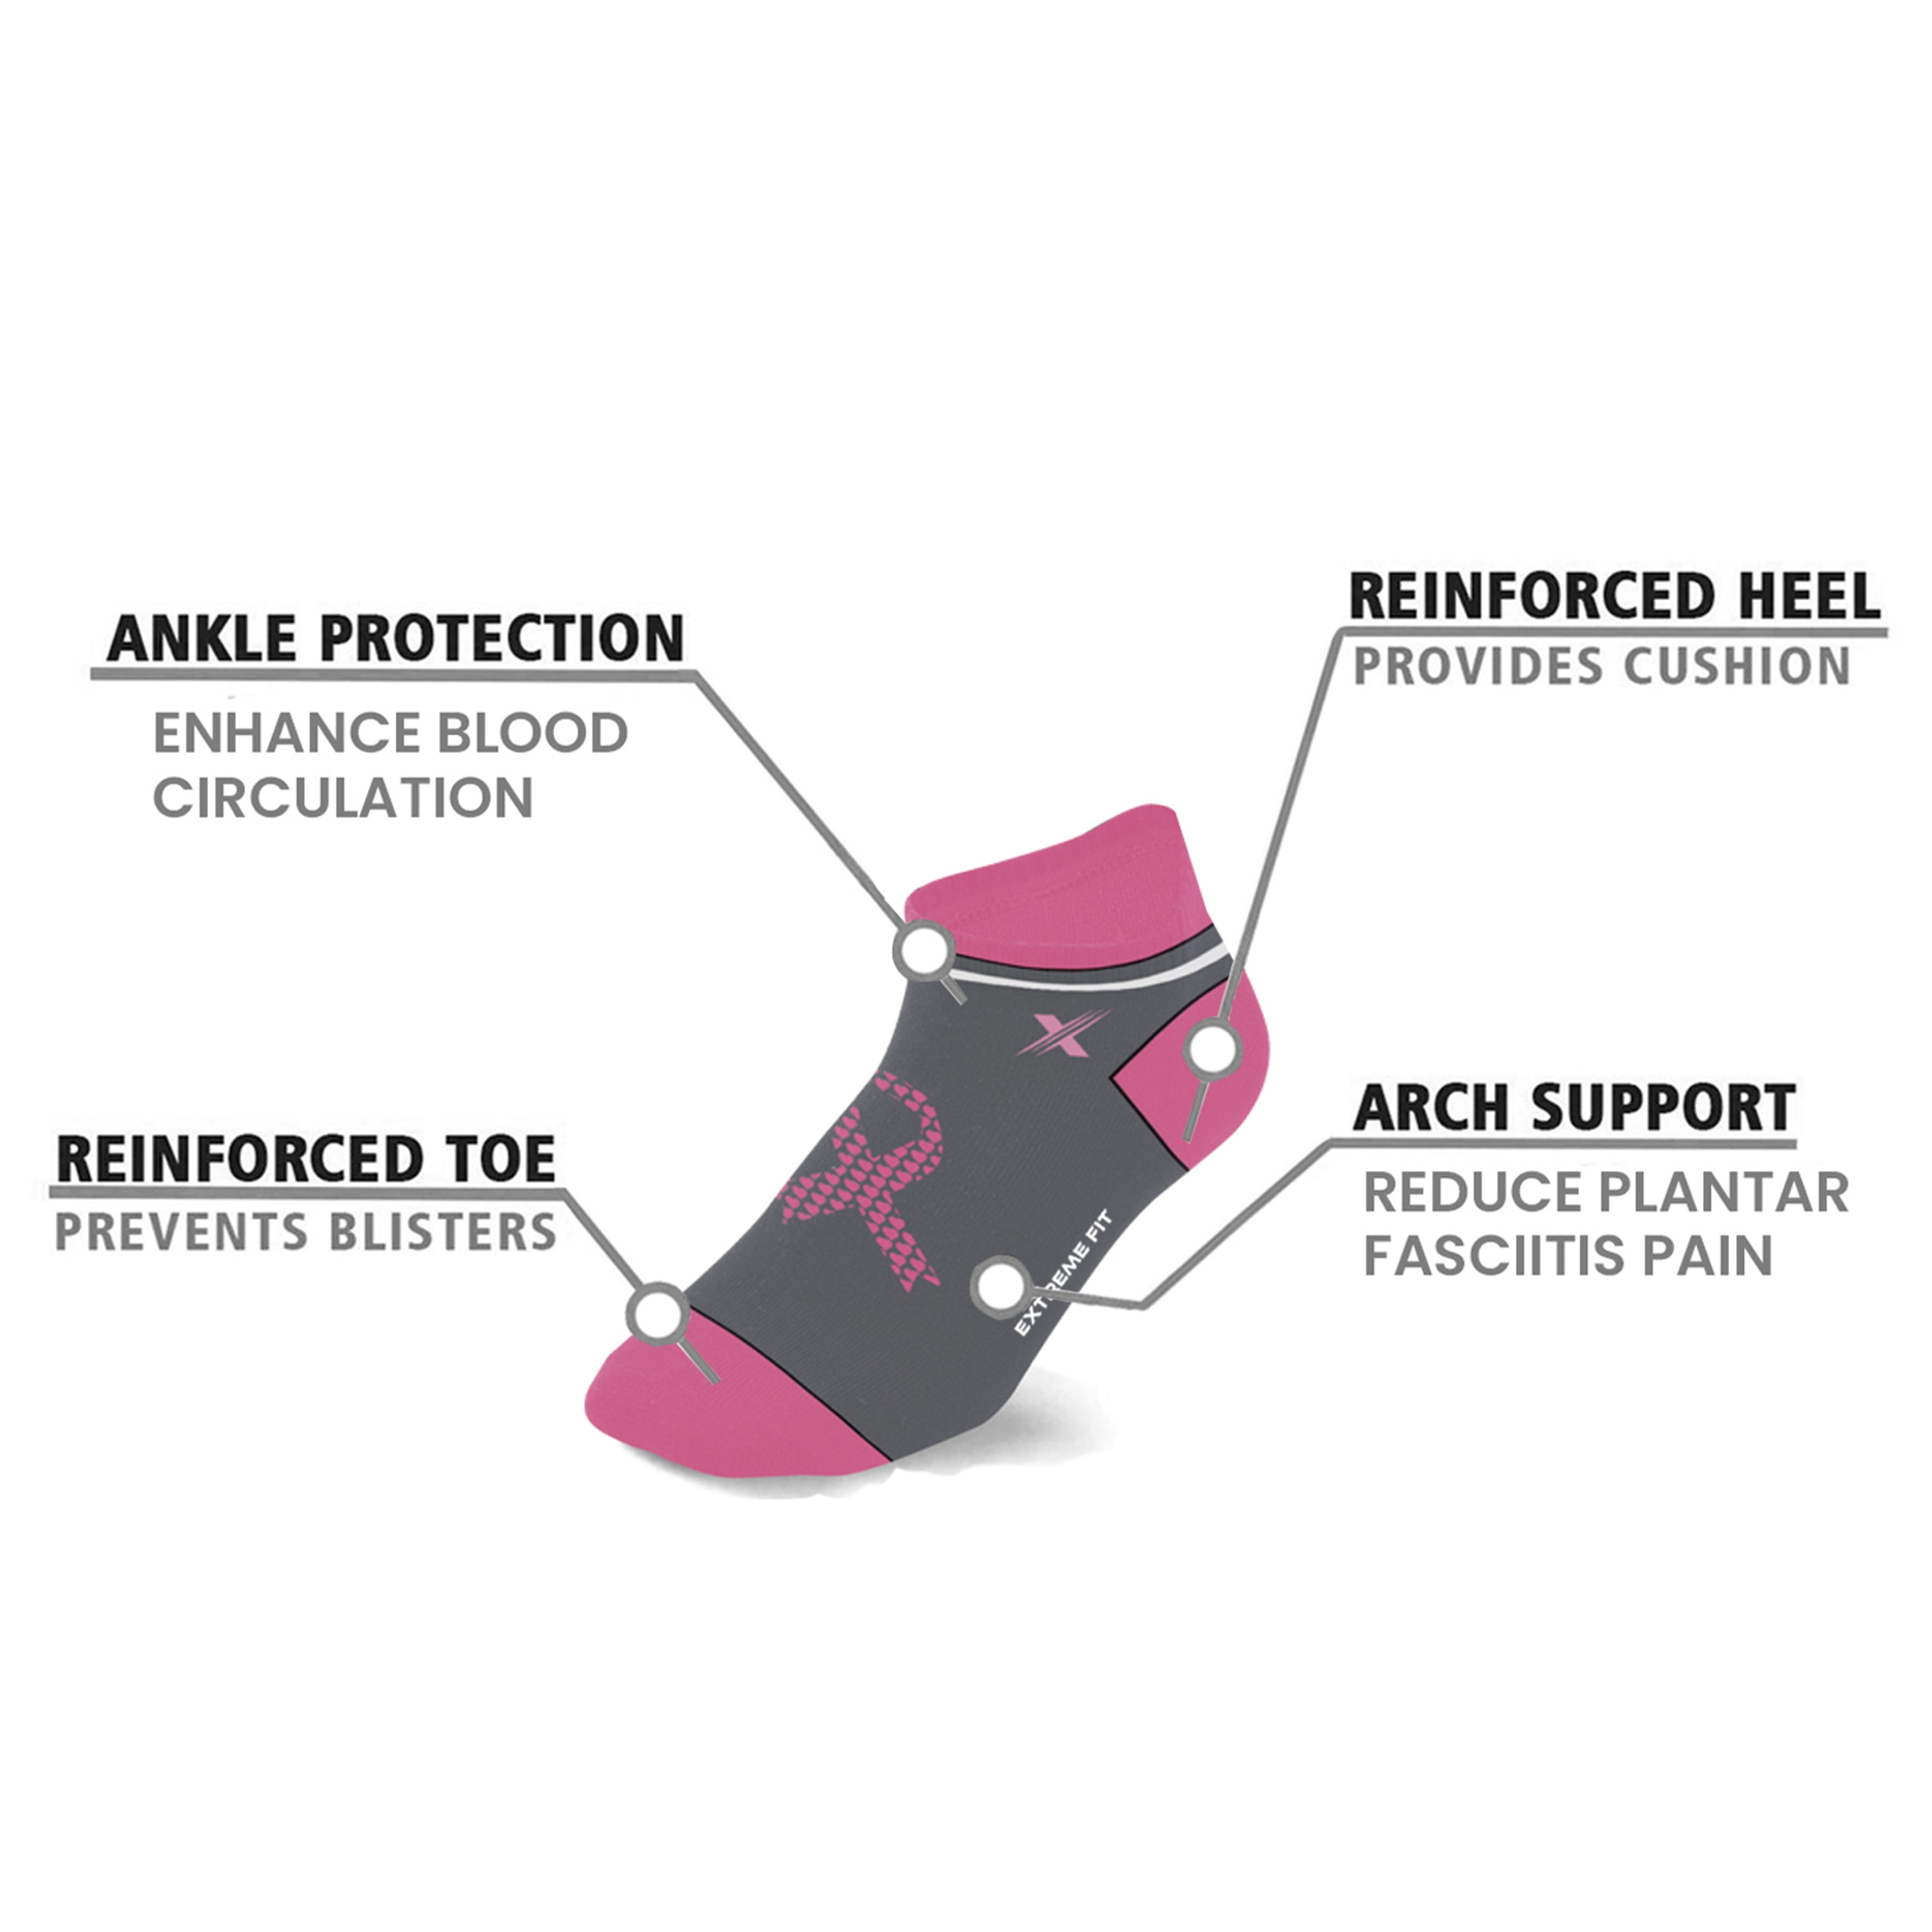 6-Pairs: Breast Cancer Awareness Beautician Ankle Compression Socks